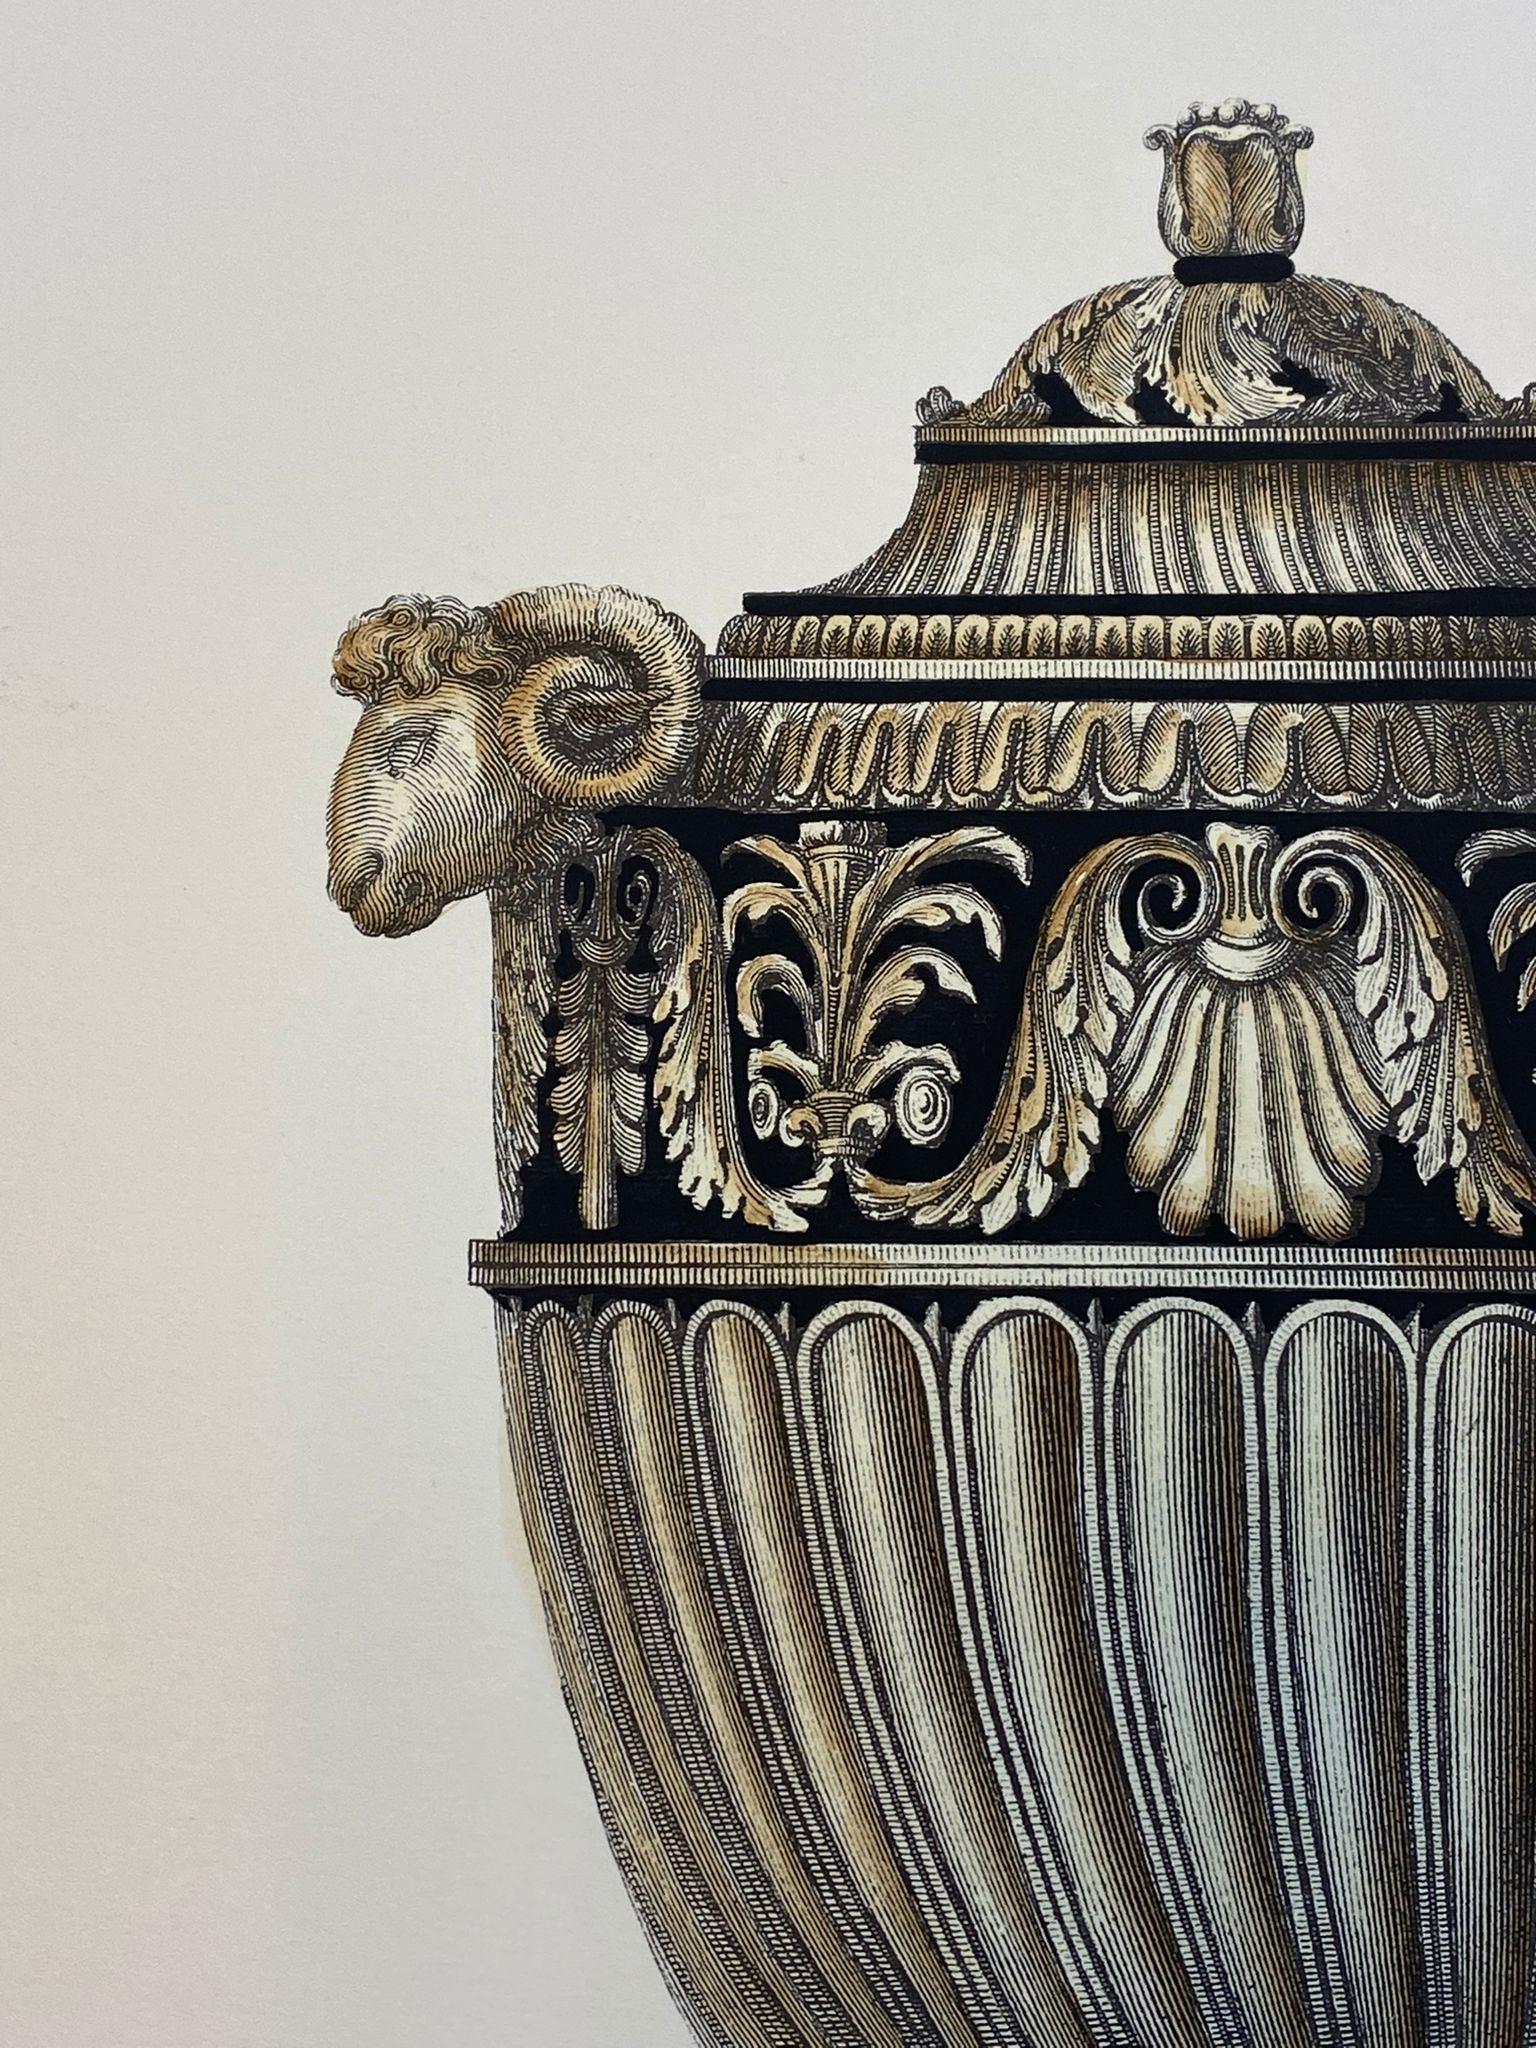 Extra large Roman vase printed on a hand press on 100% cotton engraving paper.
Completely handpainted with a cream wash, umber highlights, and matte black details.
Light brown mat with black hand embellishments.
Available in six different vase